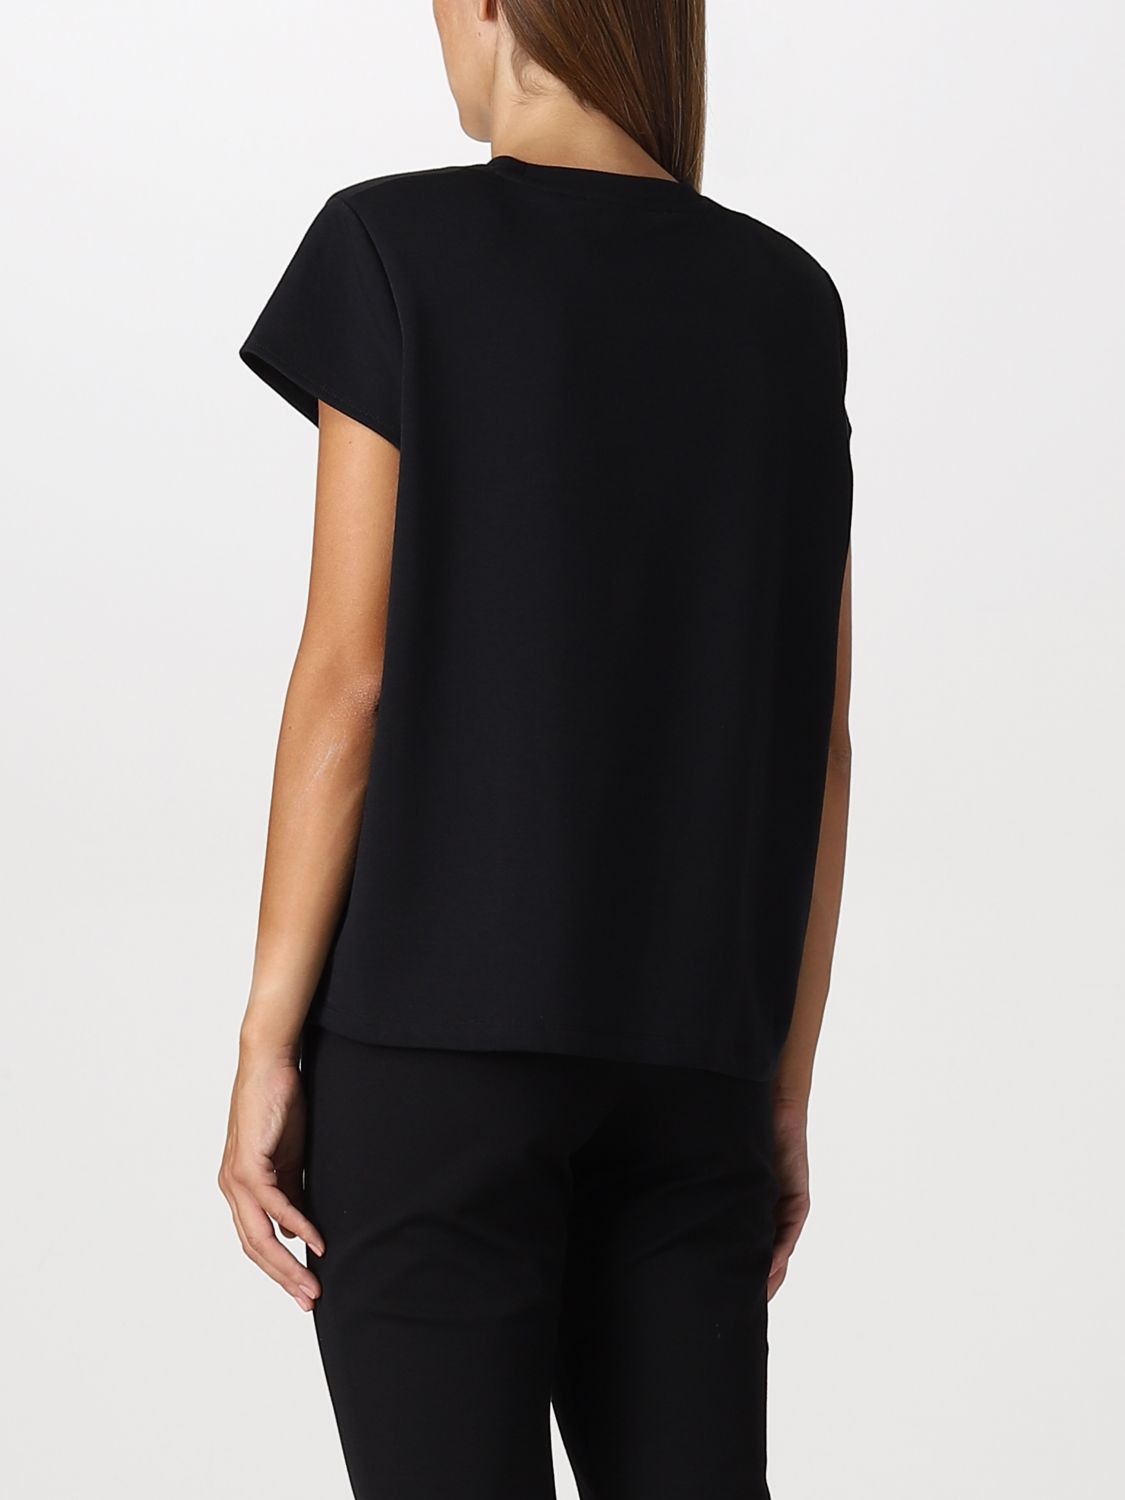 Top Rohe: Rohe top for woman black 2